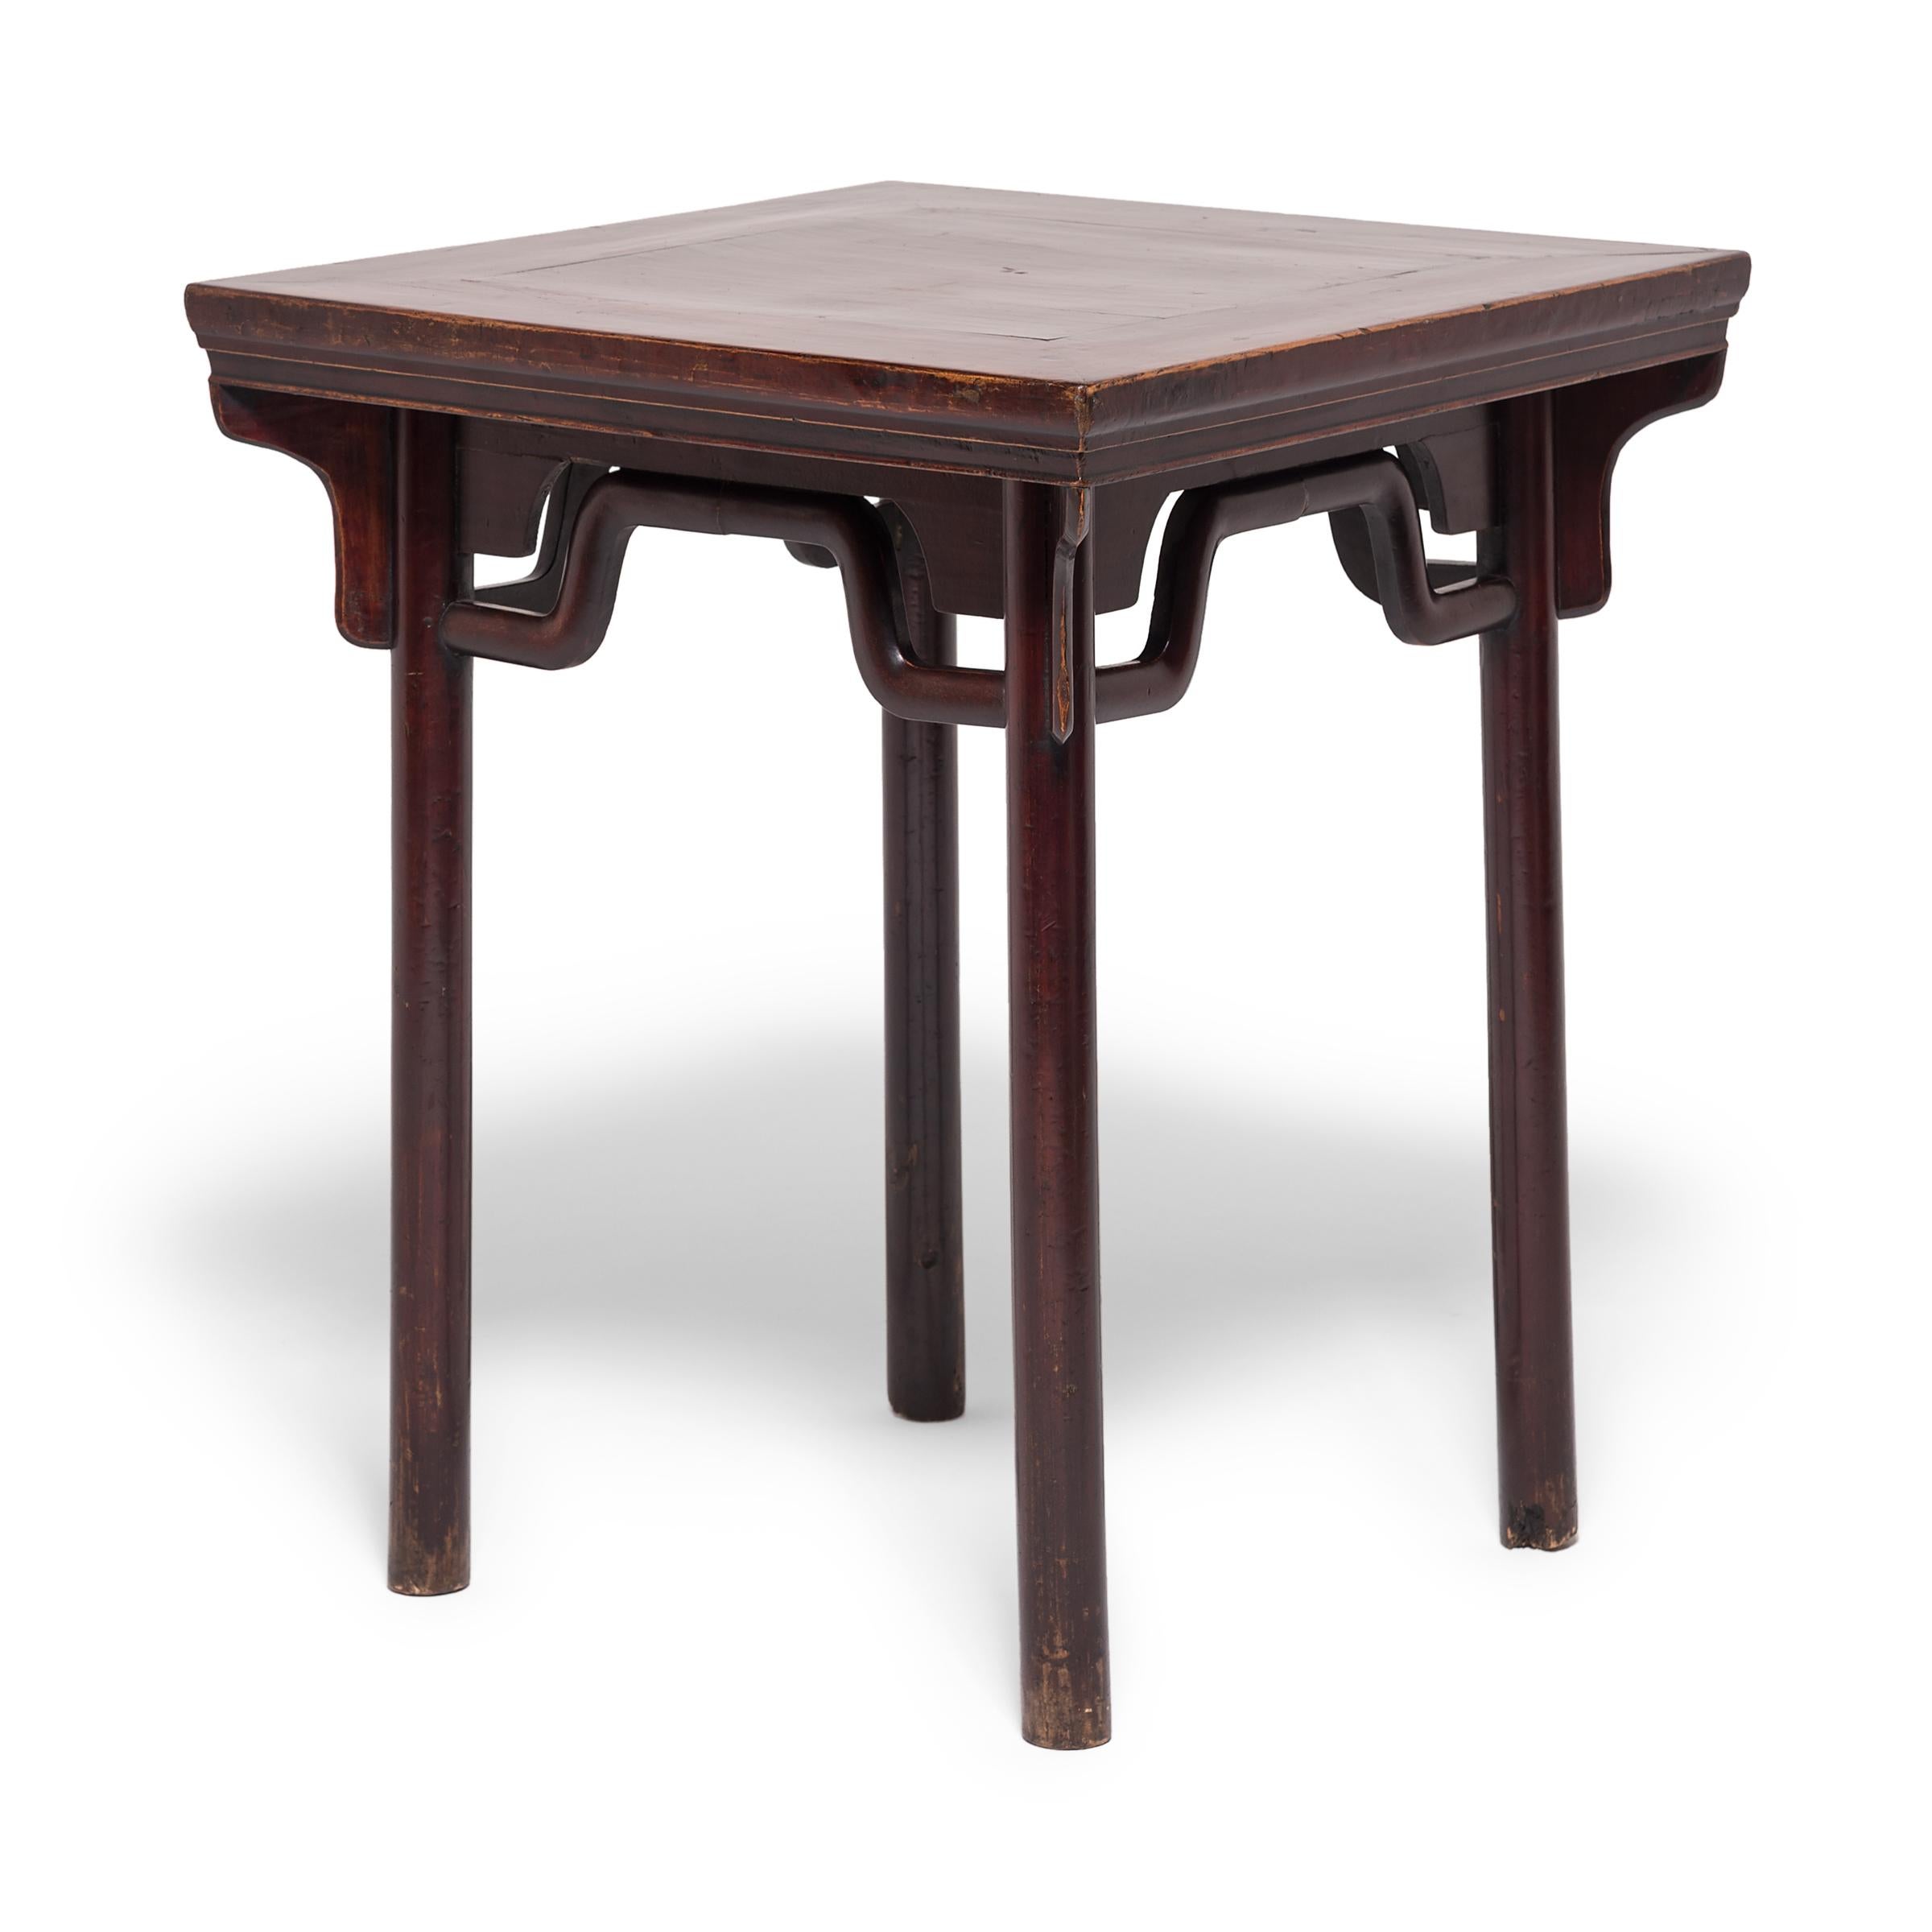 Qing 19th Century Chinese Square Table with Humpback Stretchers